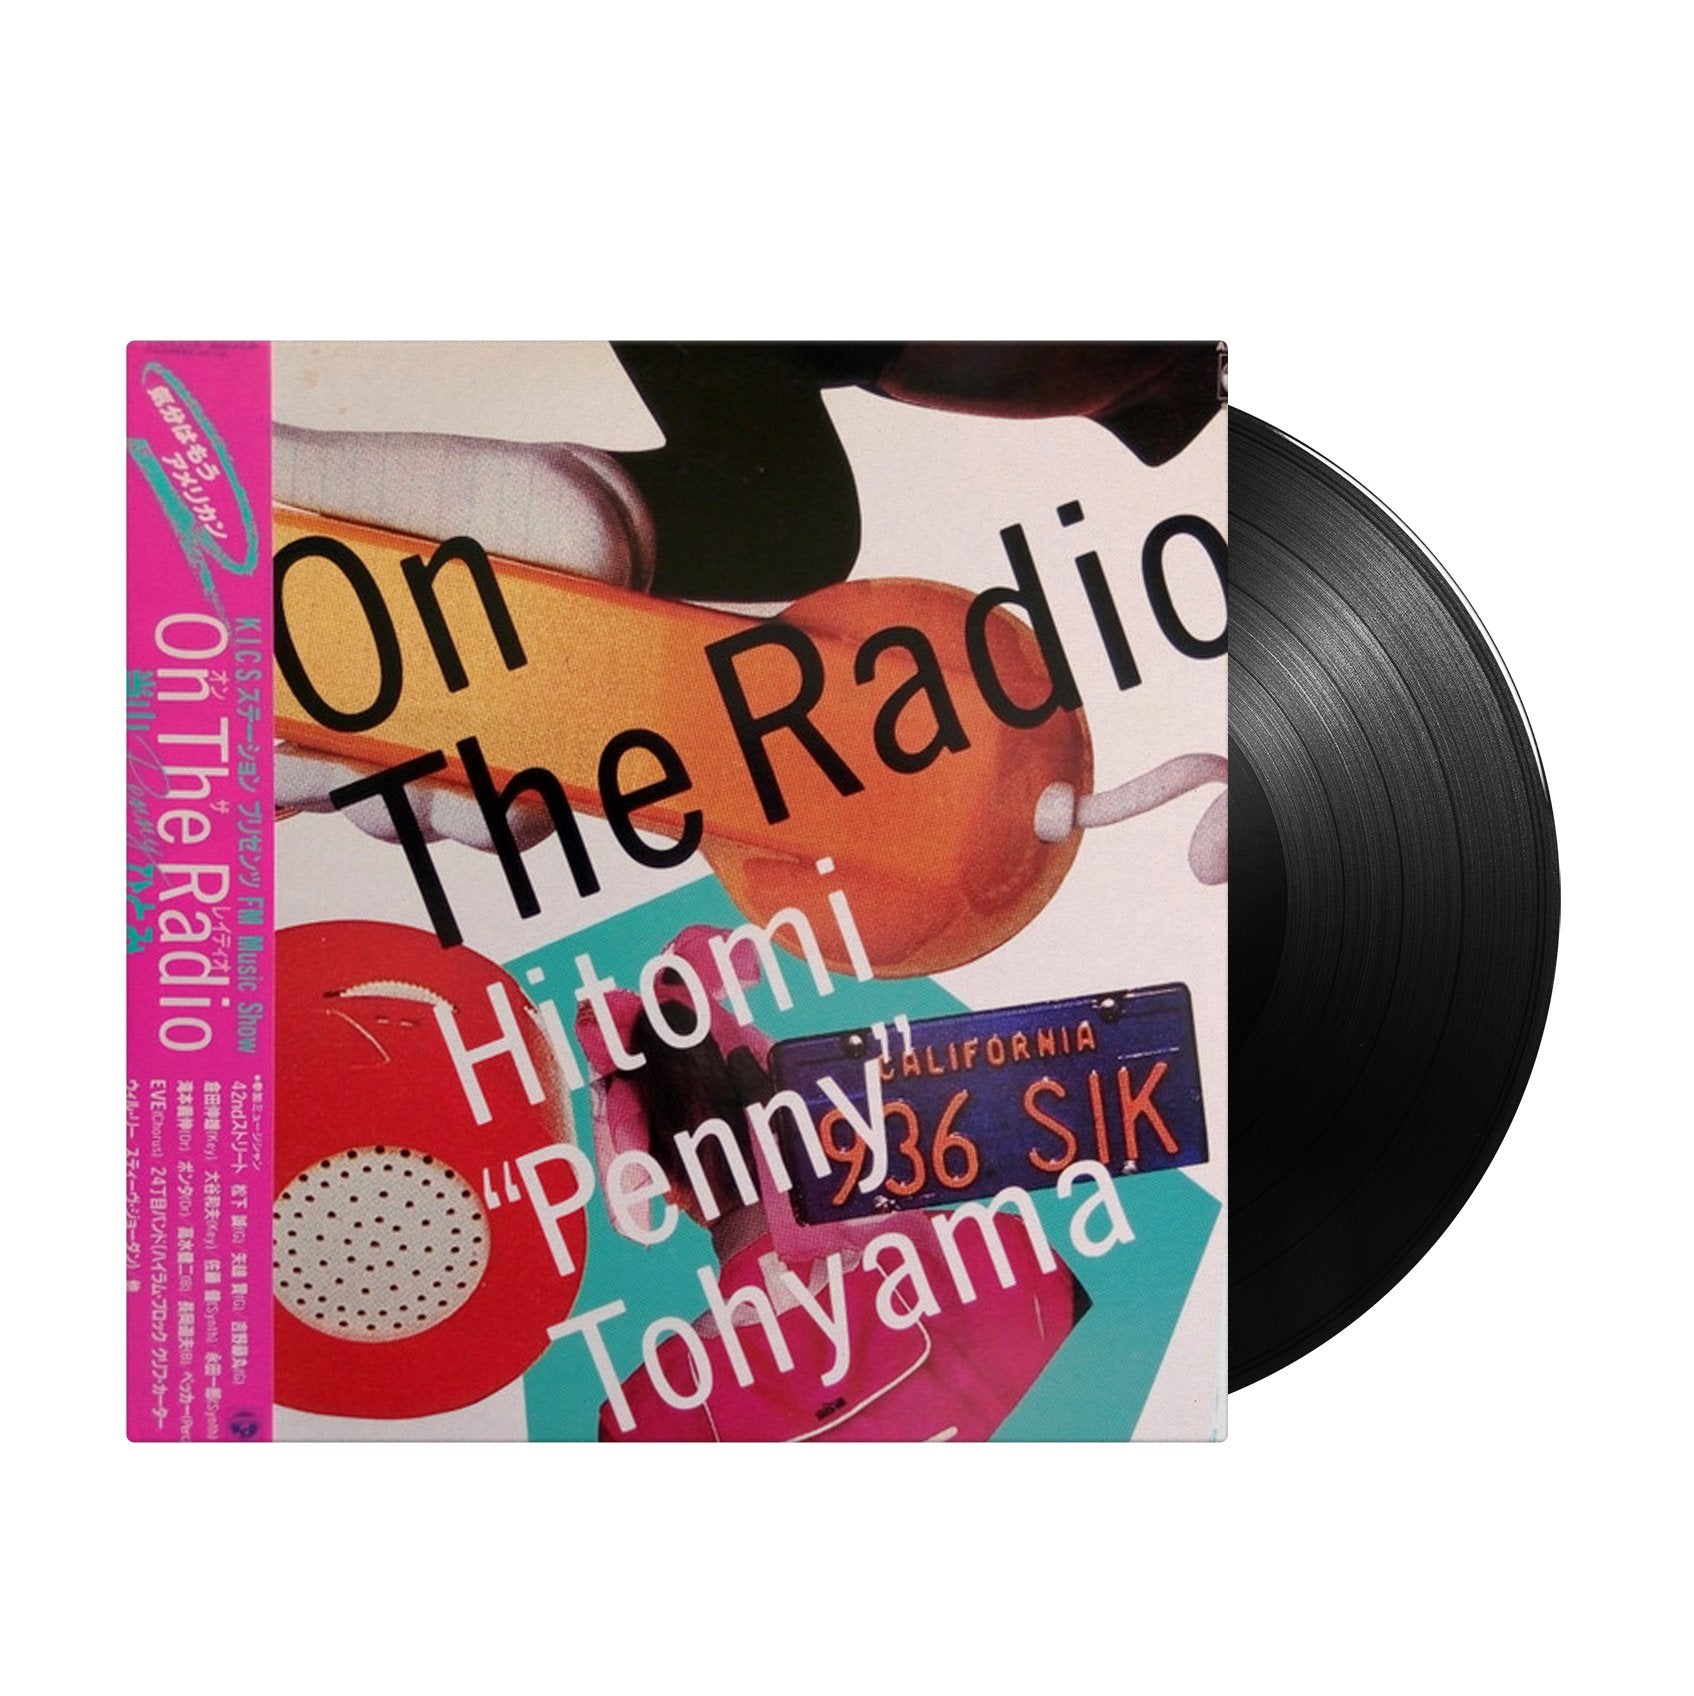 Hitomi "Penny" Tohyama - On The Radio (Japan Import) - Inner Ocean Records